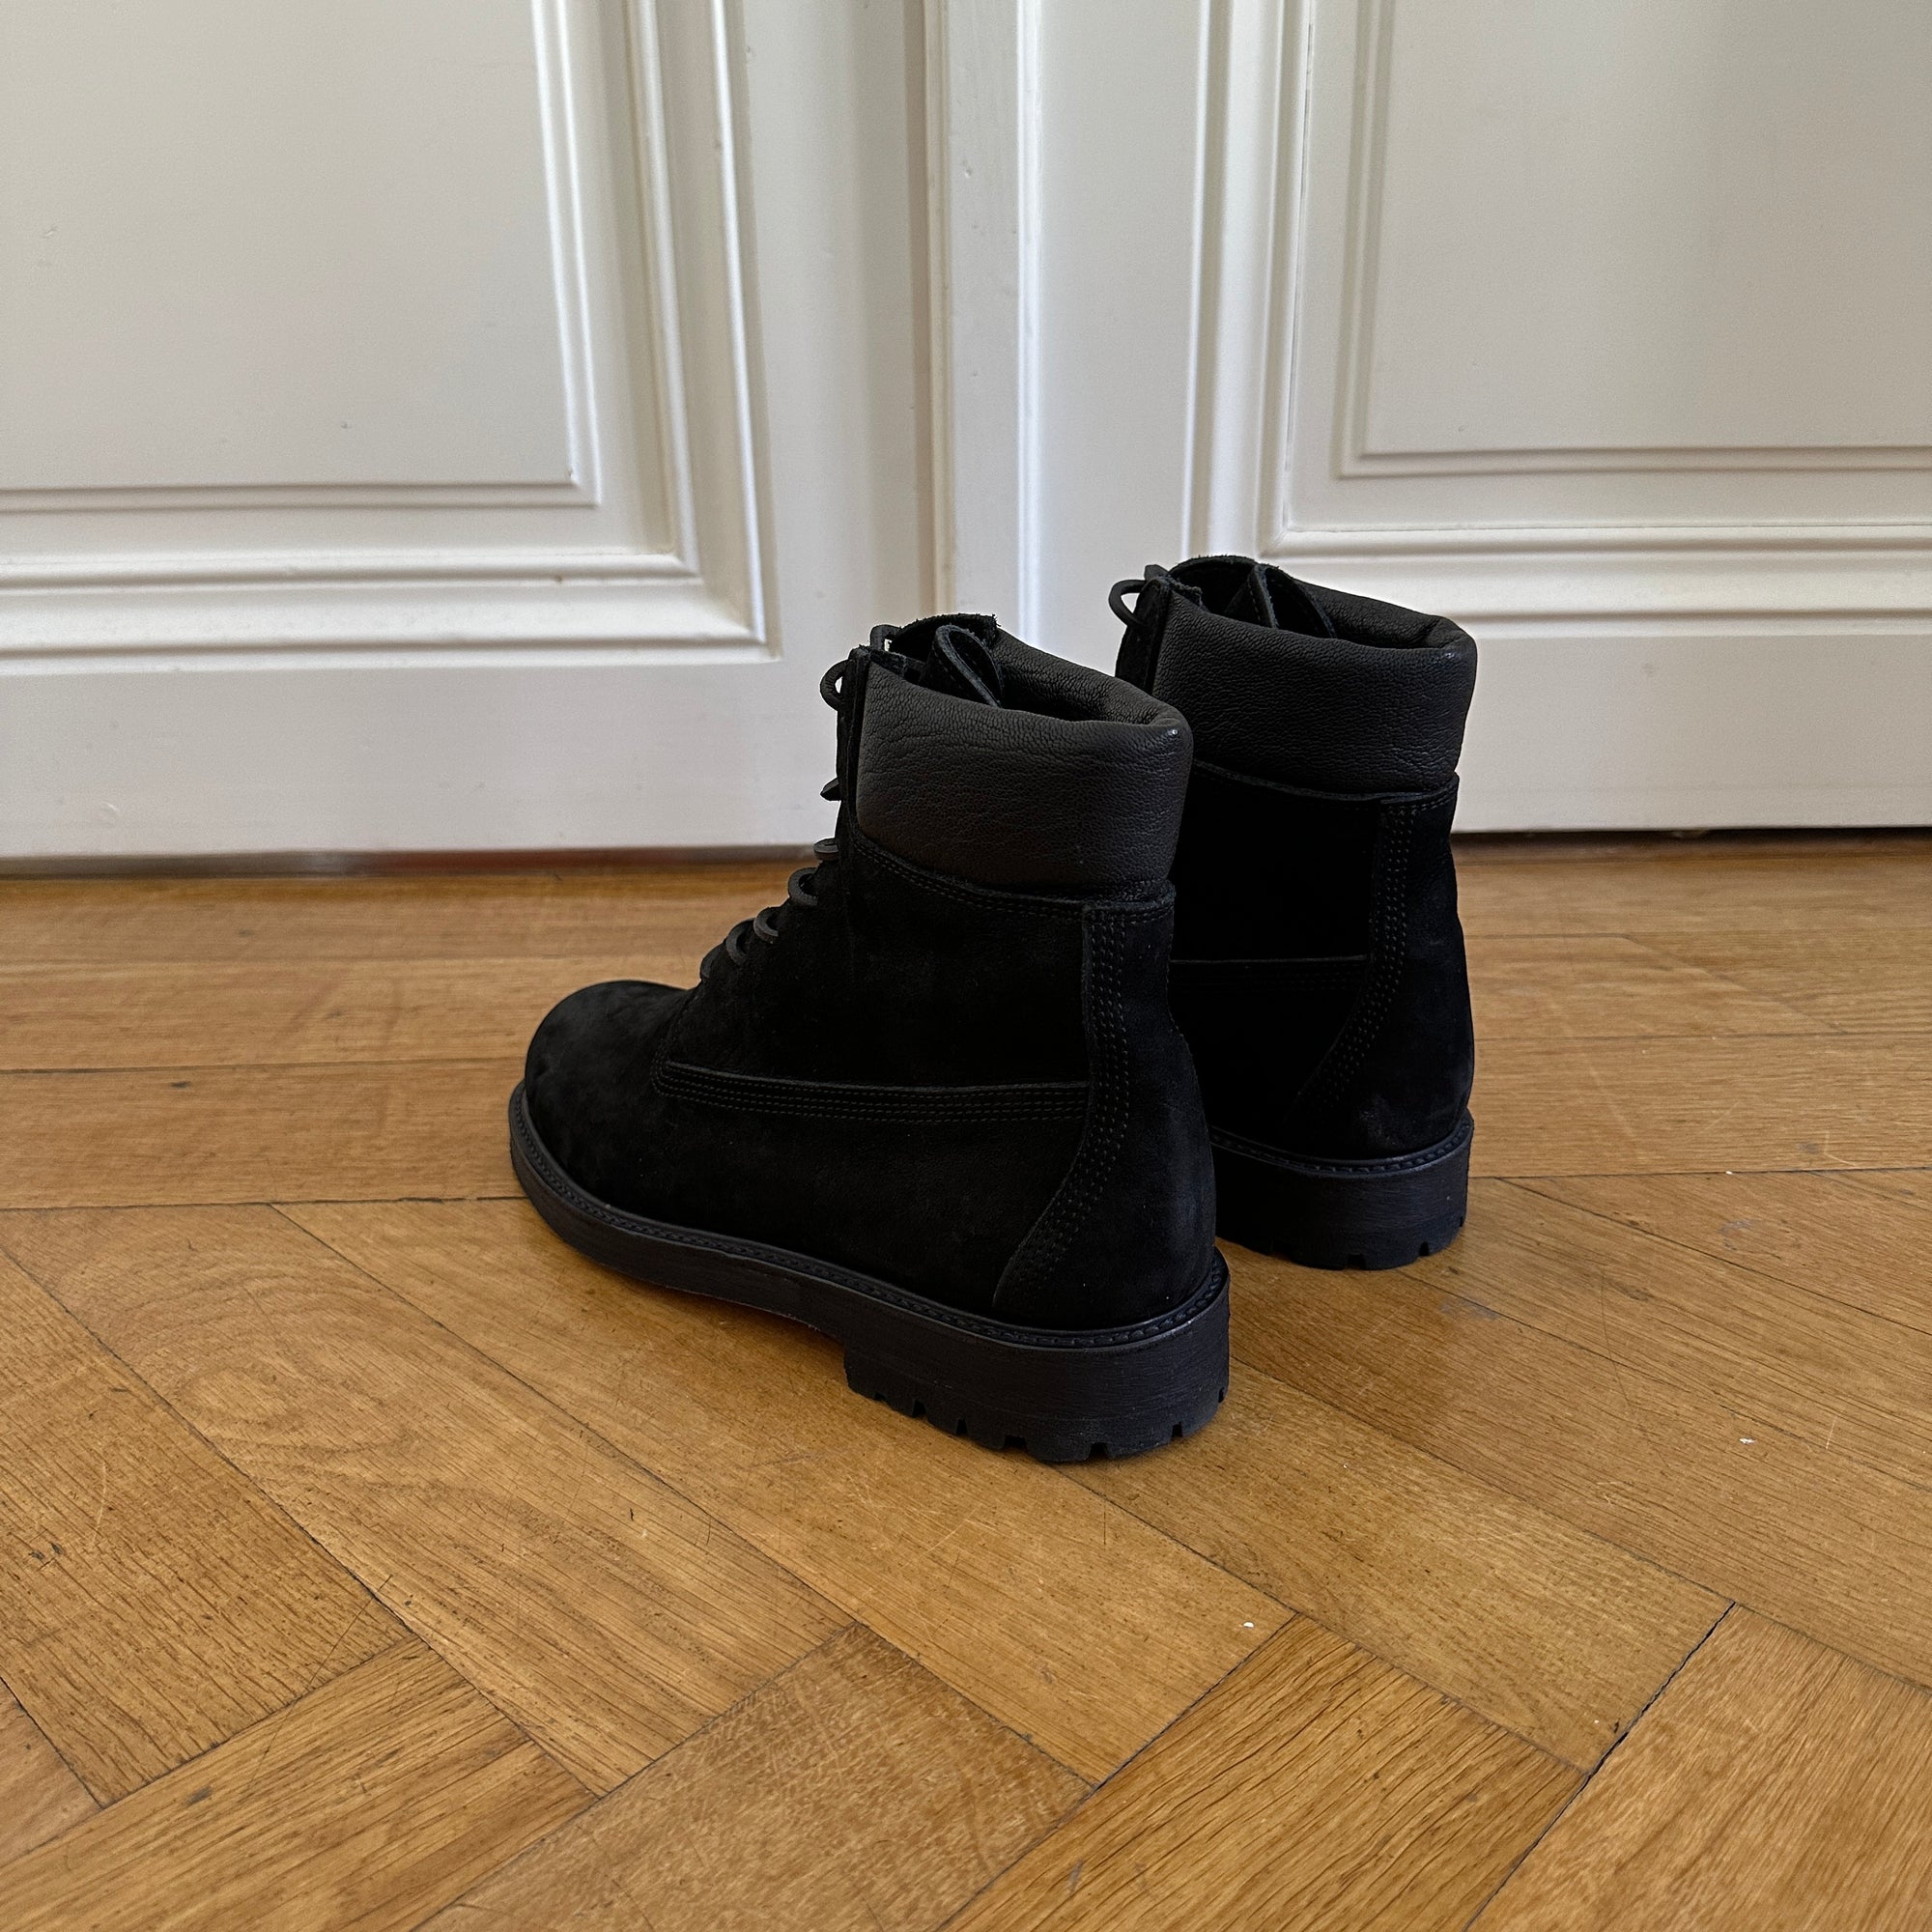 Hender Scheme Manual Industrial Products MIP-14 Black Boots